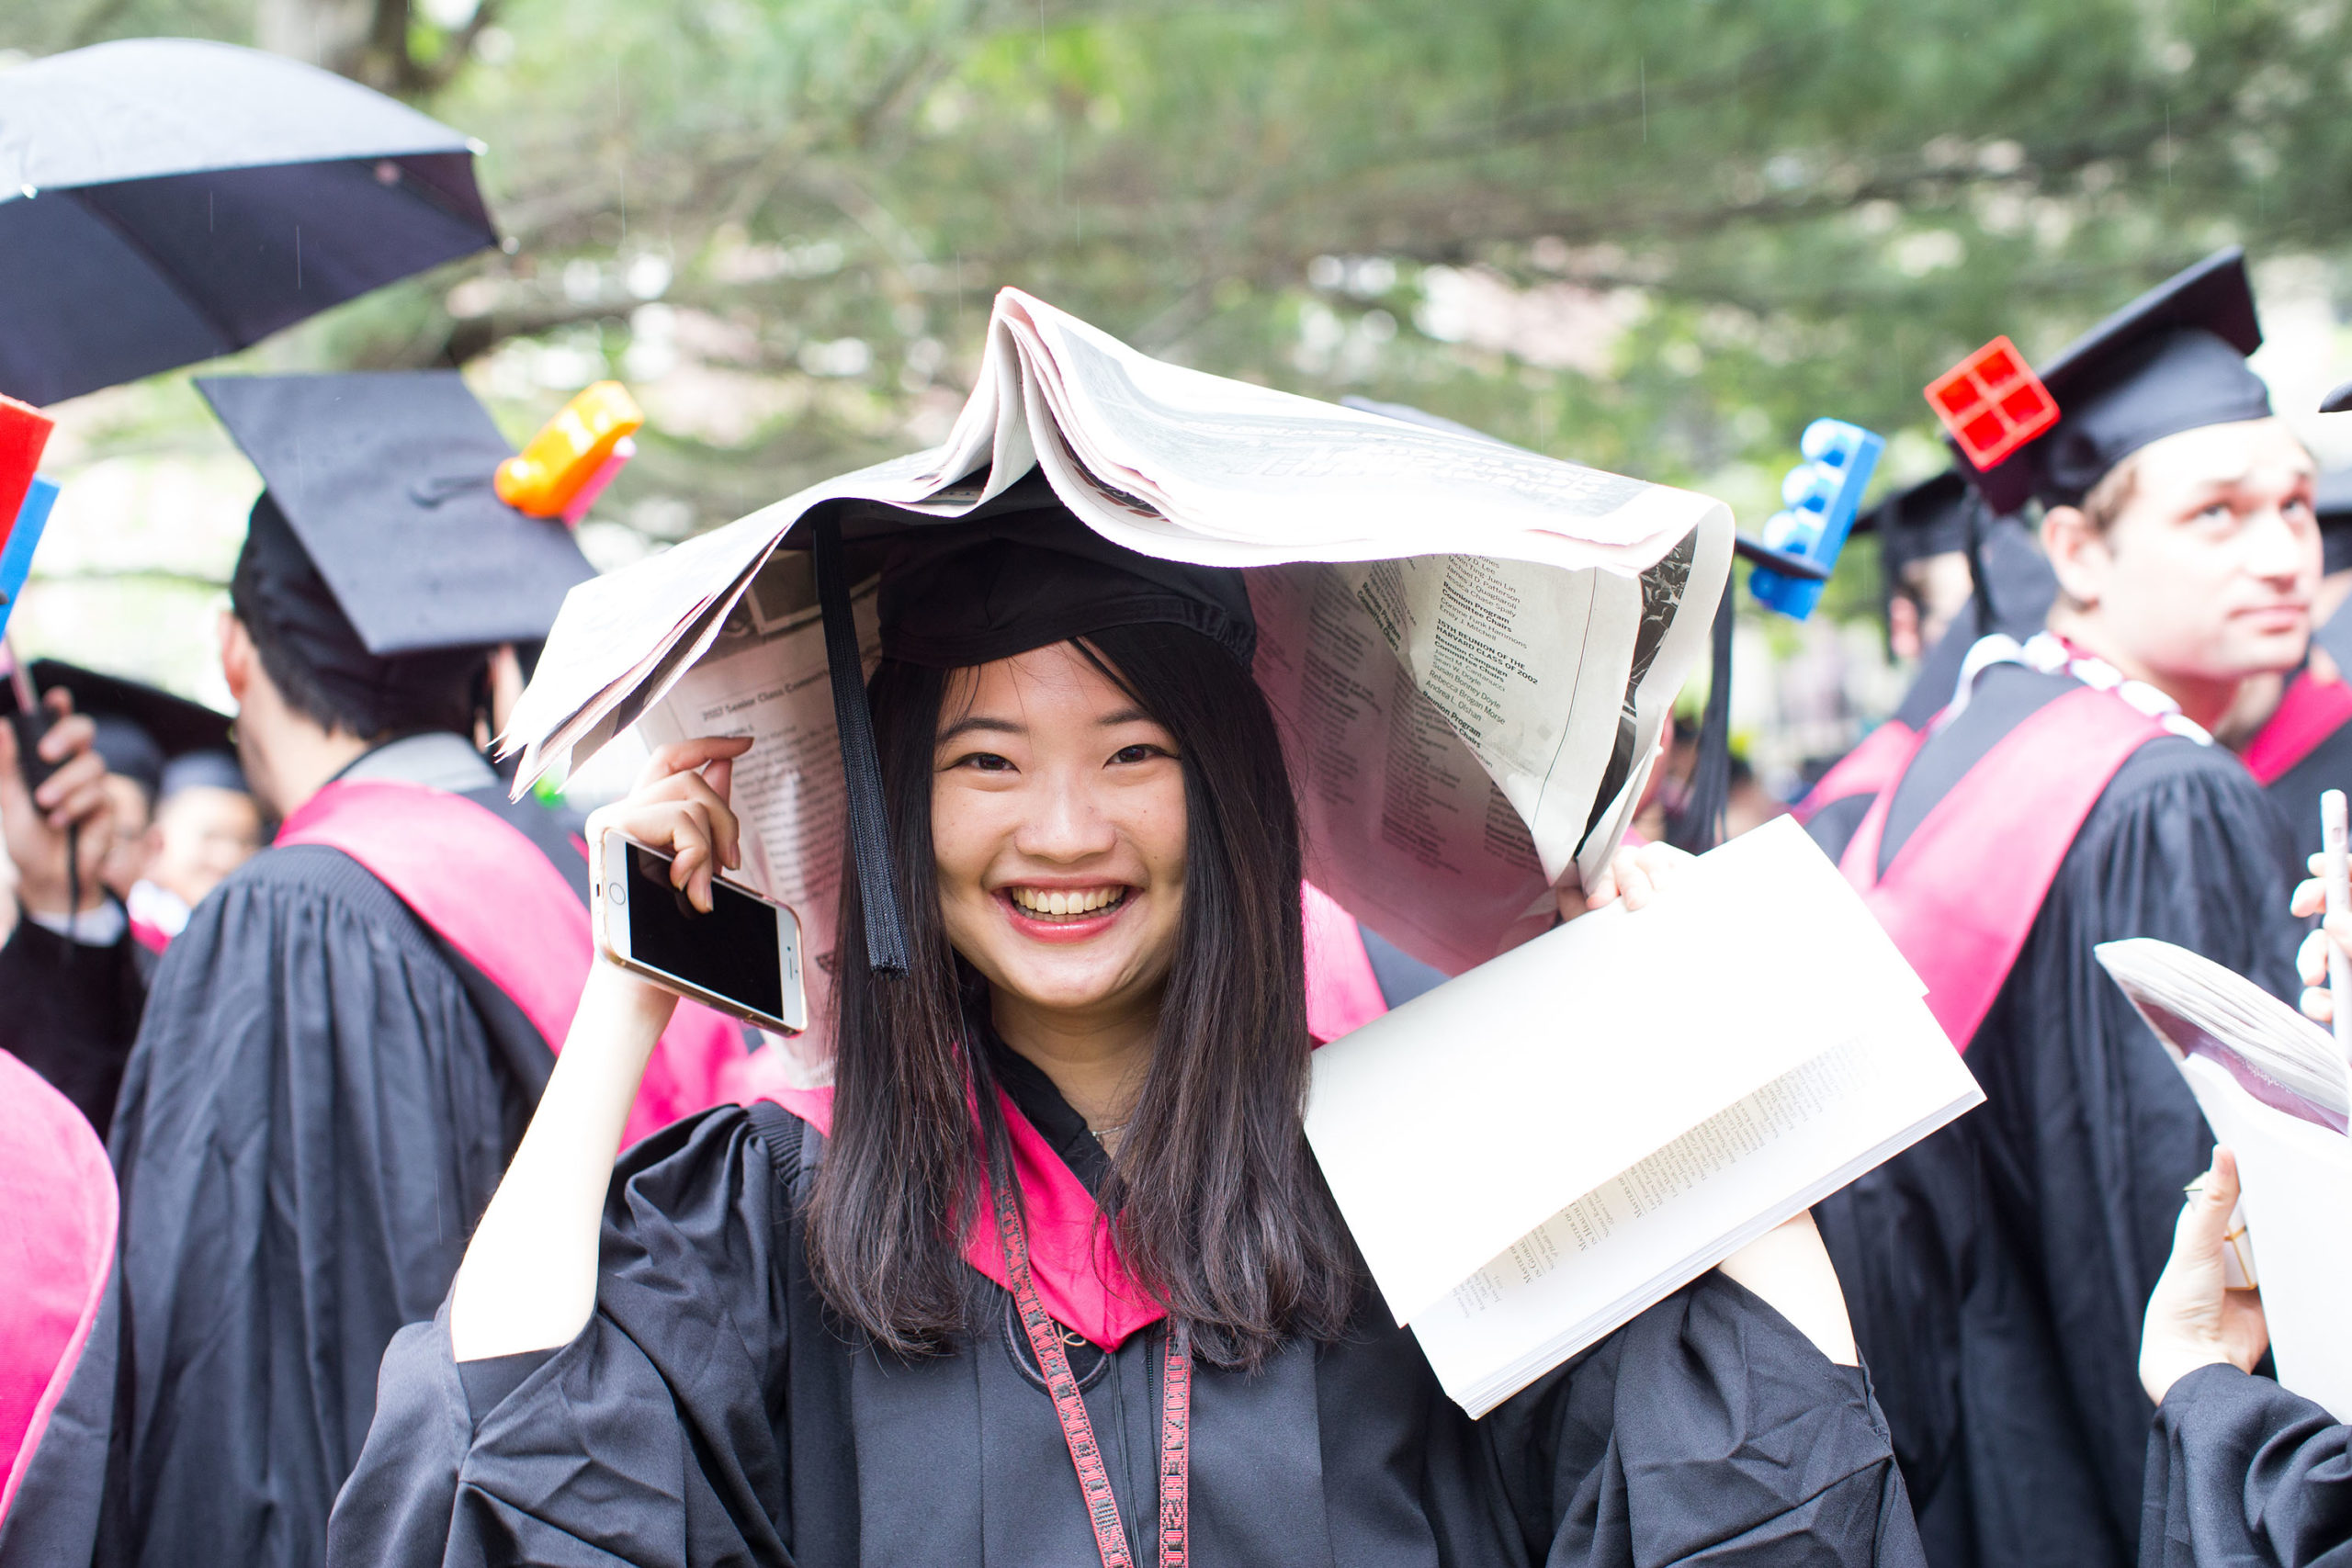 Woman dressed in graduation gown smiles at the camera while holding a newspaper above her head to shield her from the rain.